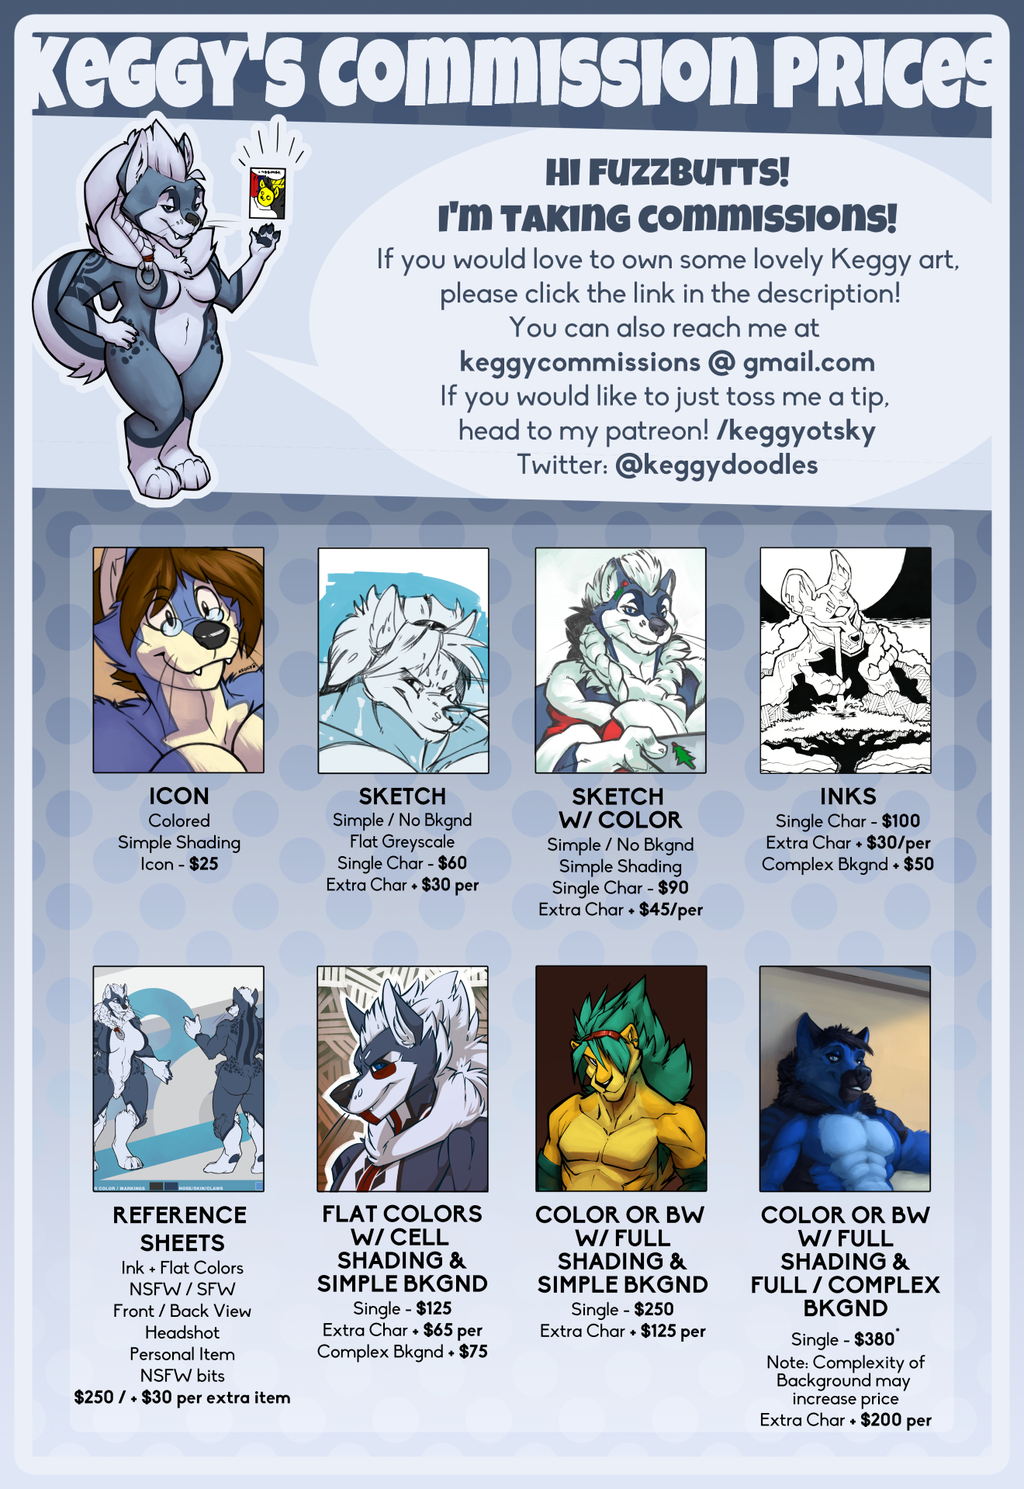 Most recent image: Commission Pricing 